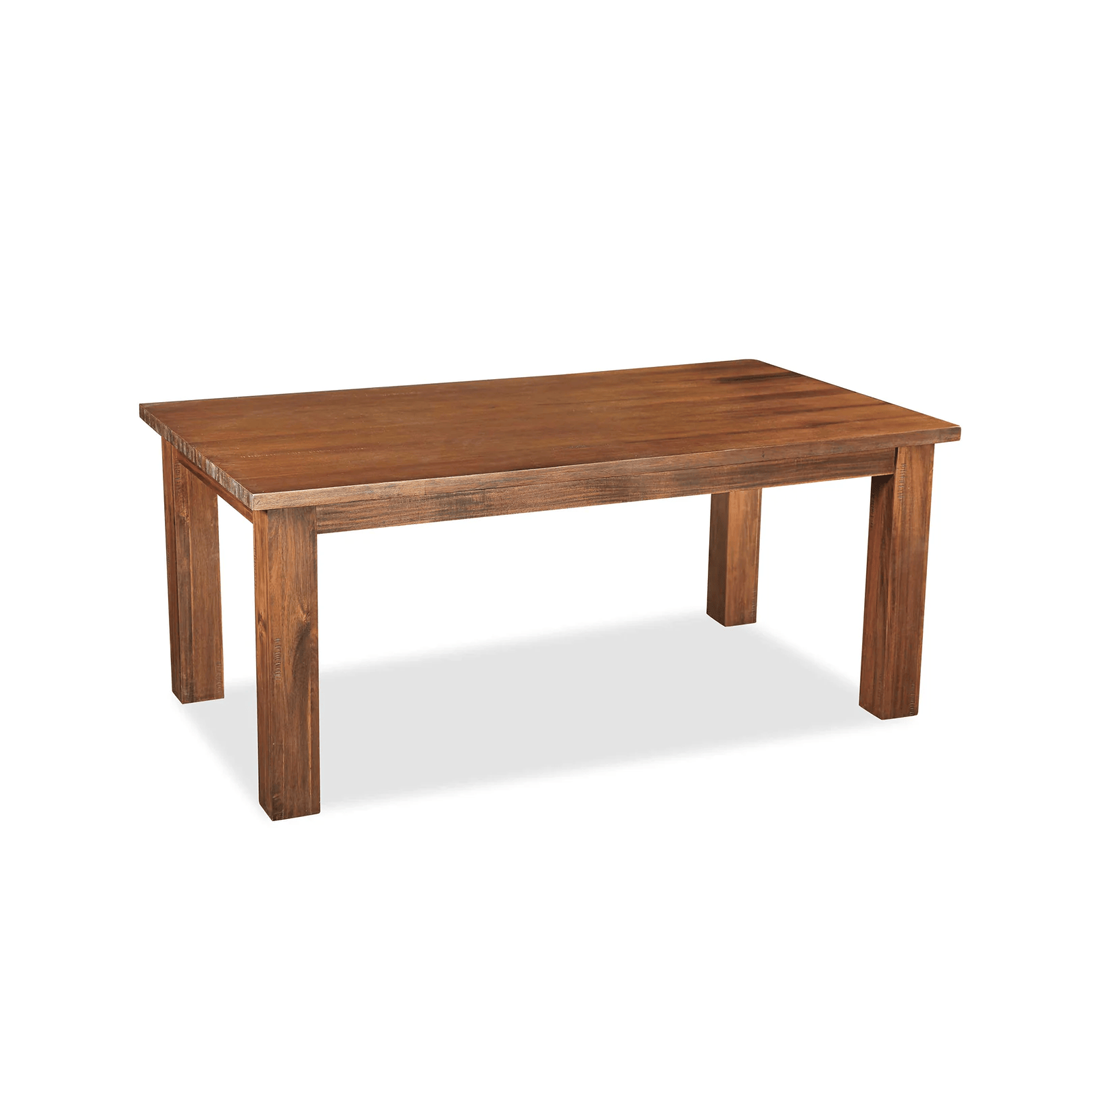 Hawkesbury Timber Dining Table 1.8m